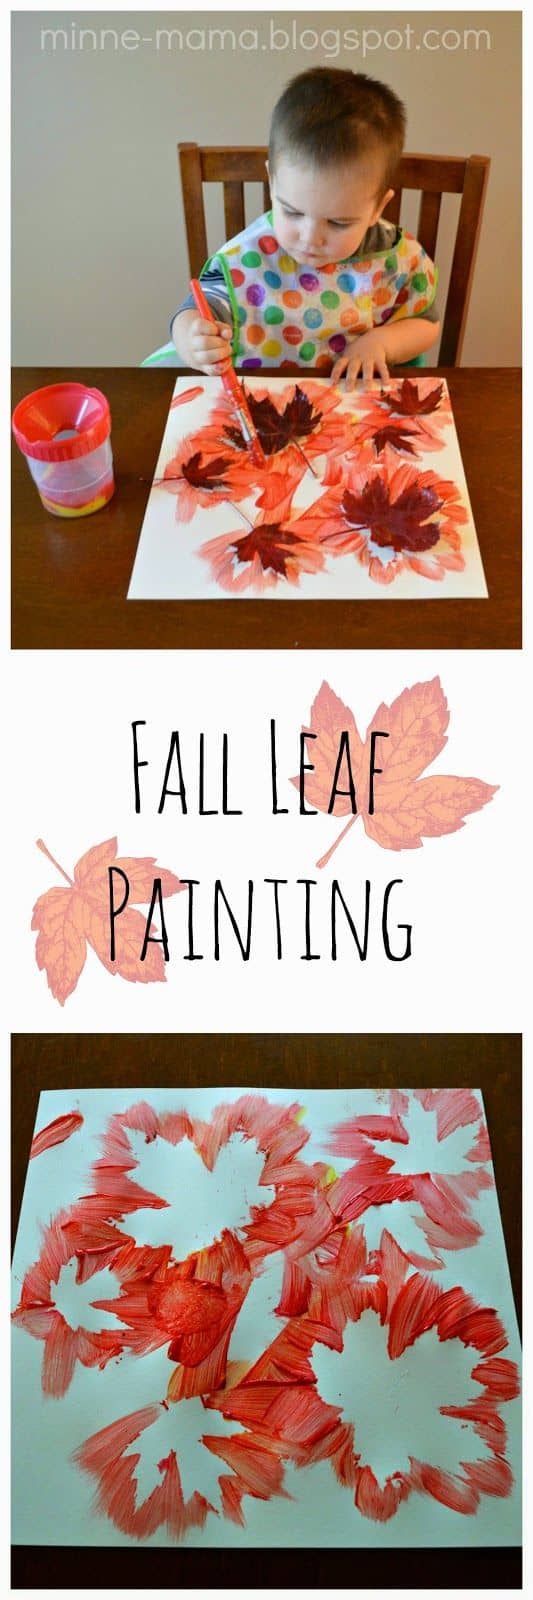 #16 FABRICATE AN ARTISTIC MASTERPIECE USING AUTUMN LEAVES ON A WHITE SHEET OF PAPER WITH DAB BRIGHT ORANGE COLORS AROUND THEM